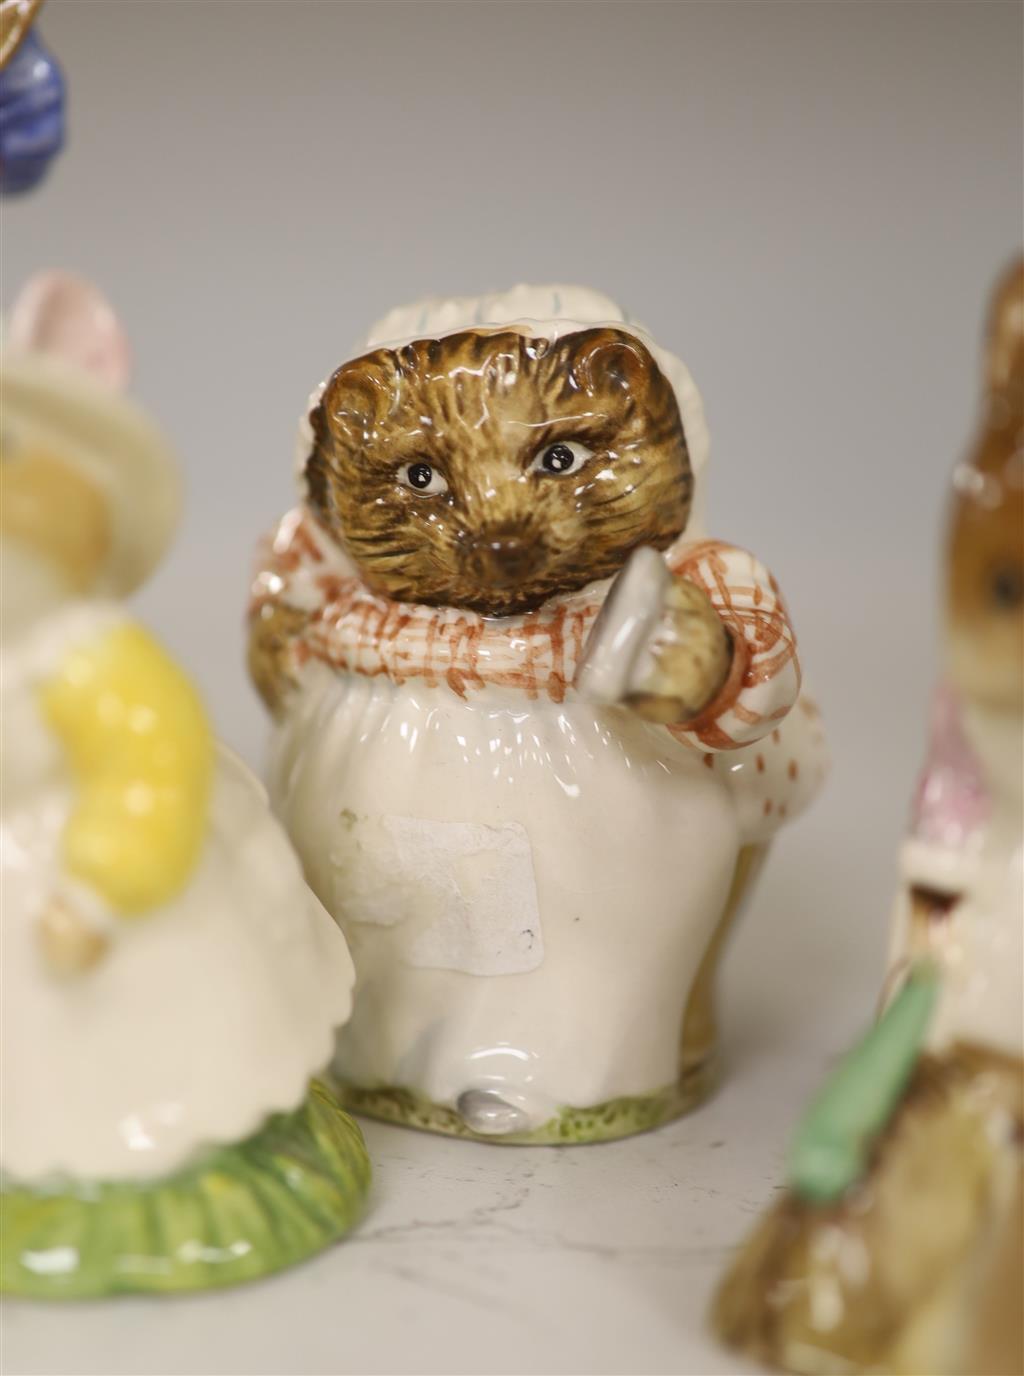 Seven Beswick Beatrix potter characters and five other ceramic models